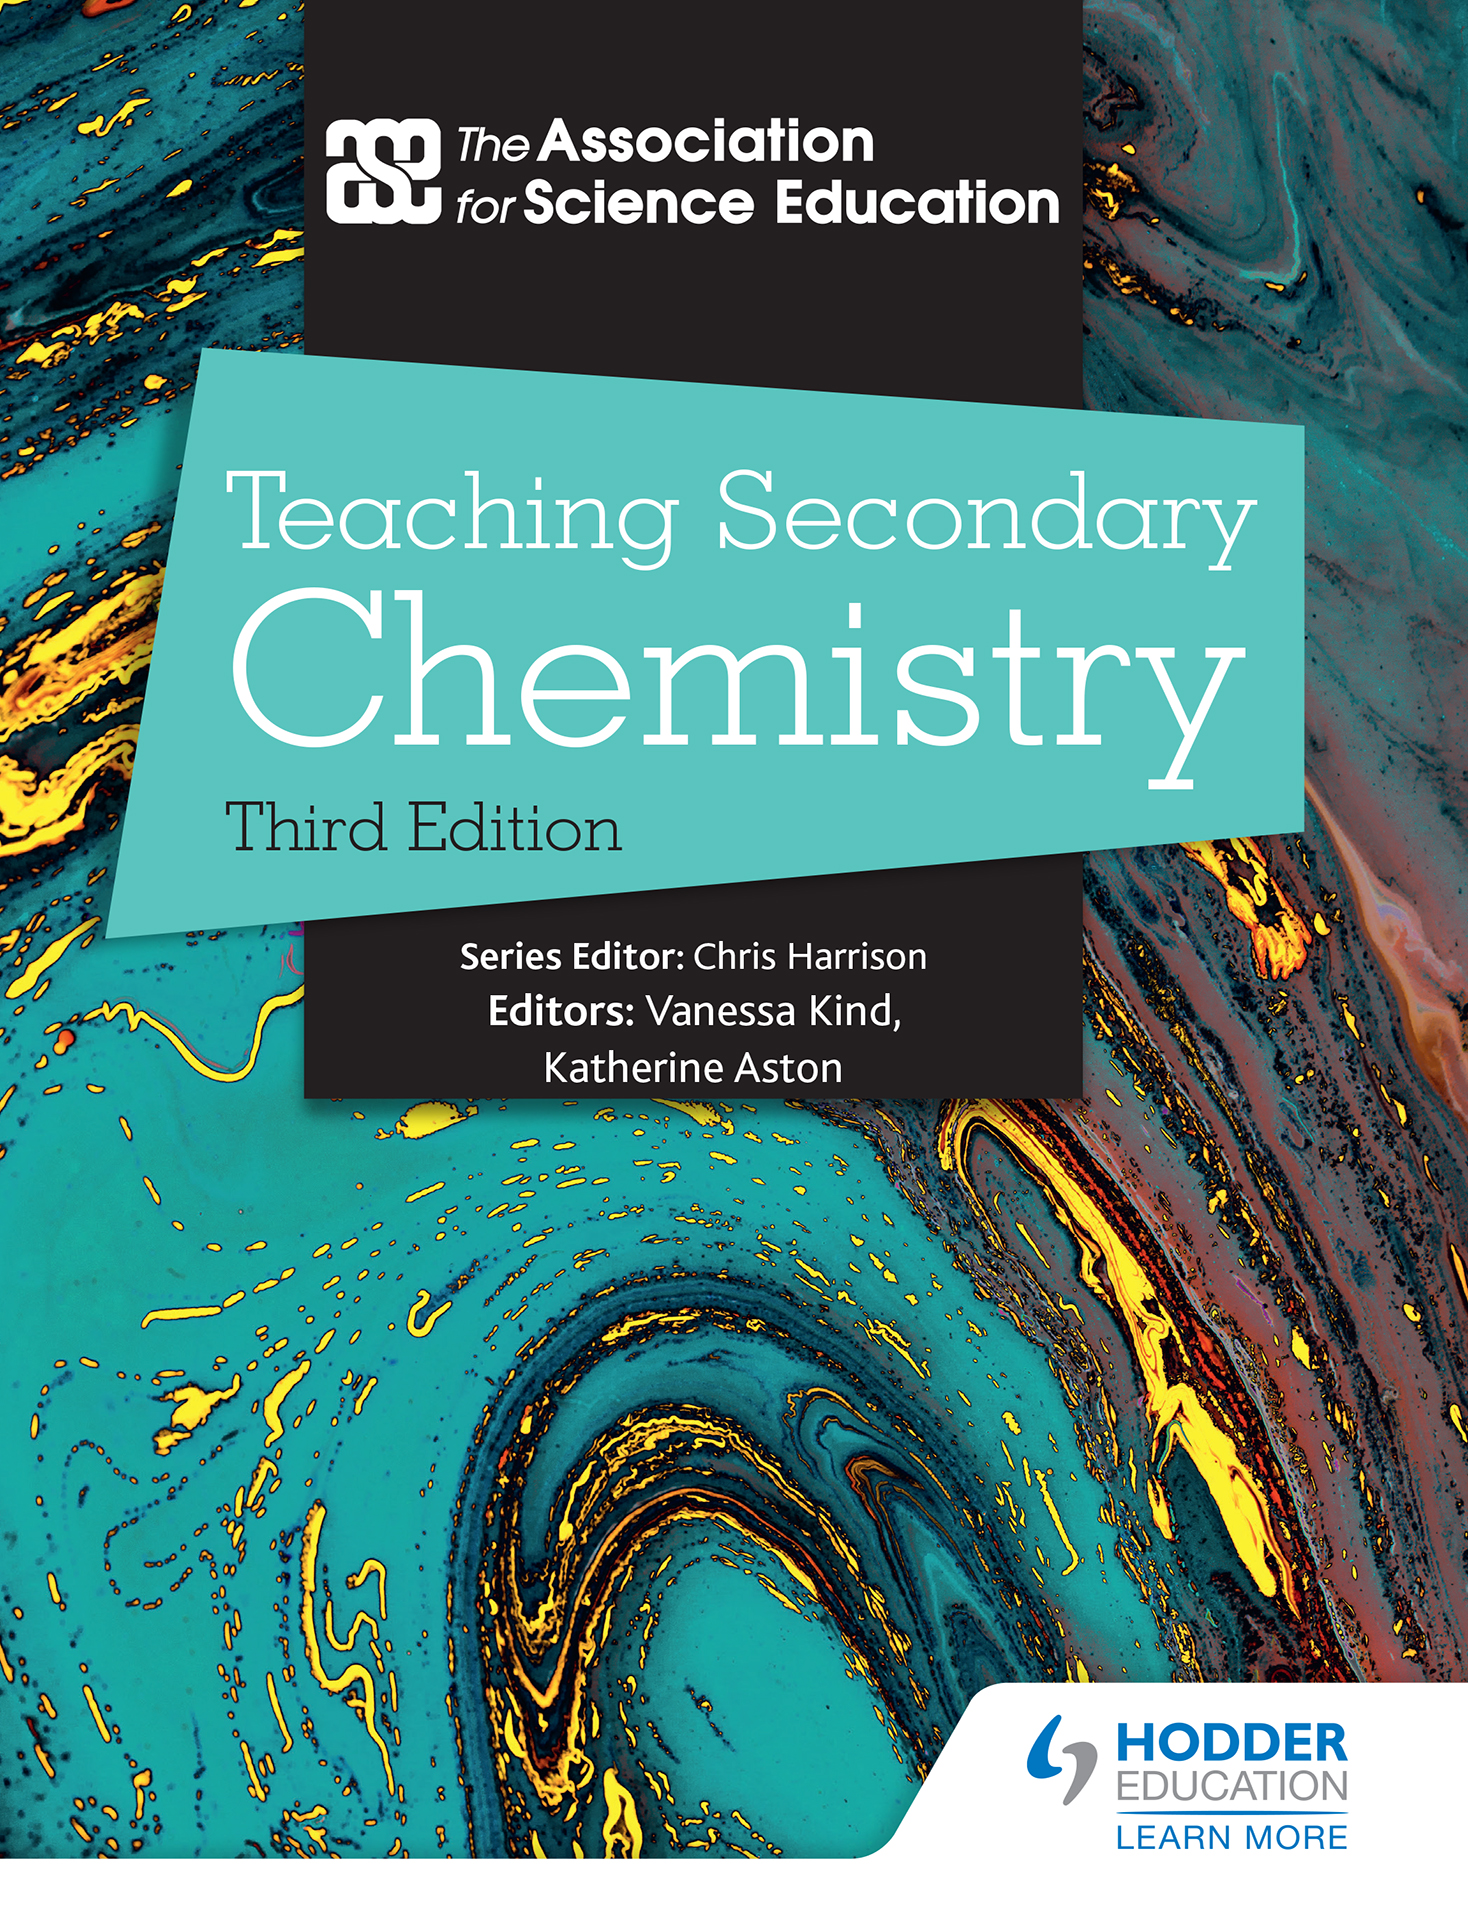 Teaching Secondary Chemistry 3rd Edition